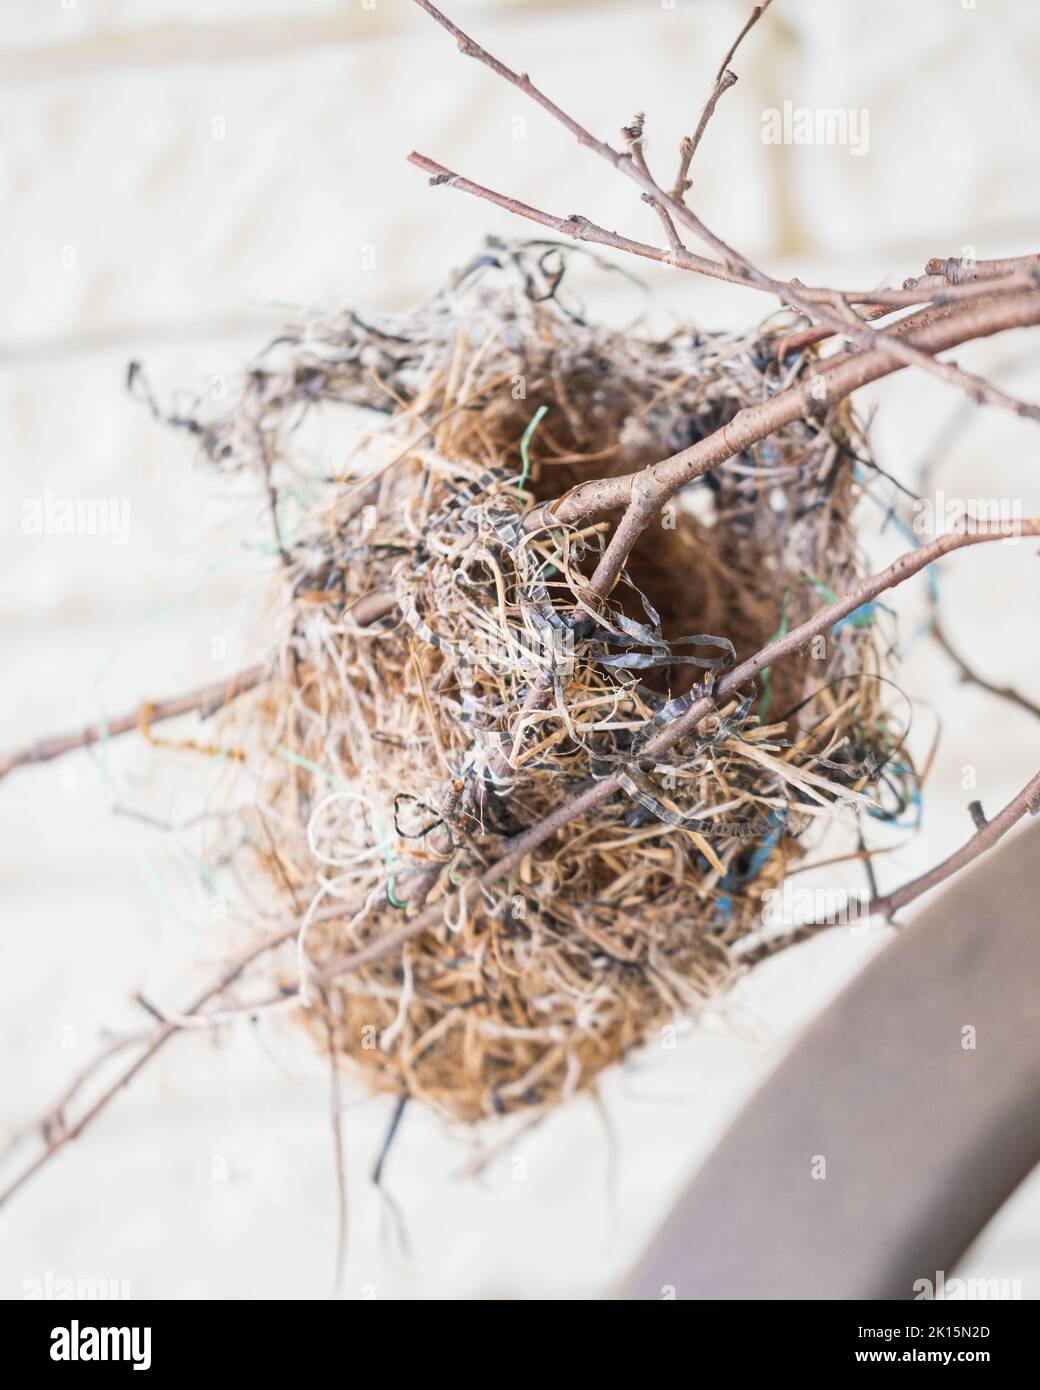 An empty Baltimore Oriole's bird's nest, Icterus galbula, attached to small branches, made of grasses and bits of plastic, fallen from a tree. Kansas, Stock Photo